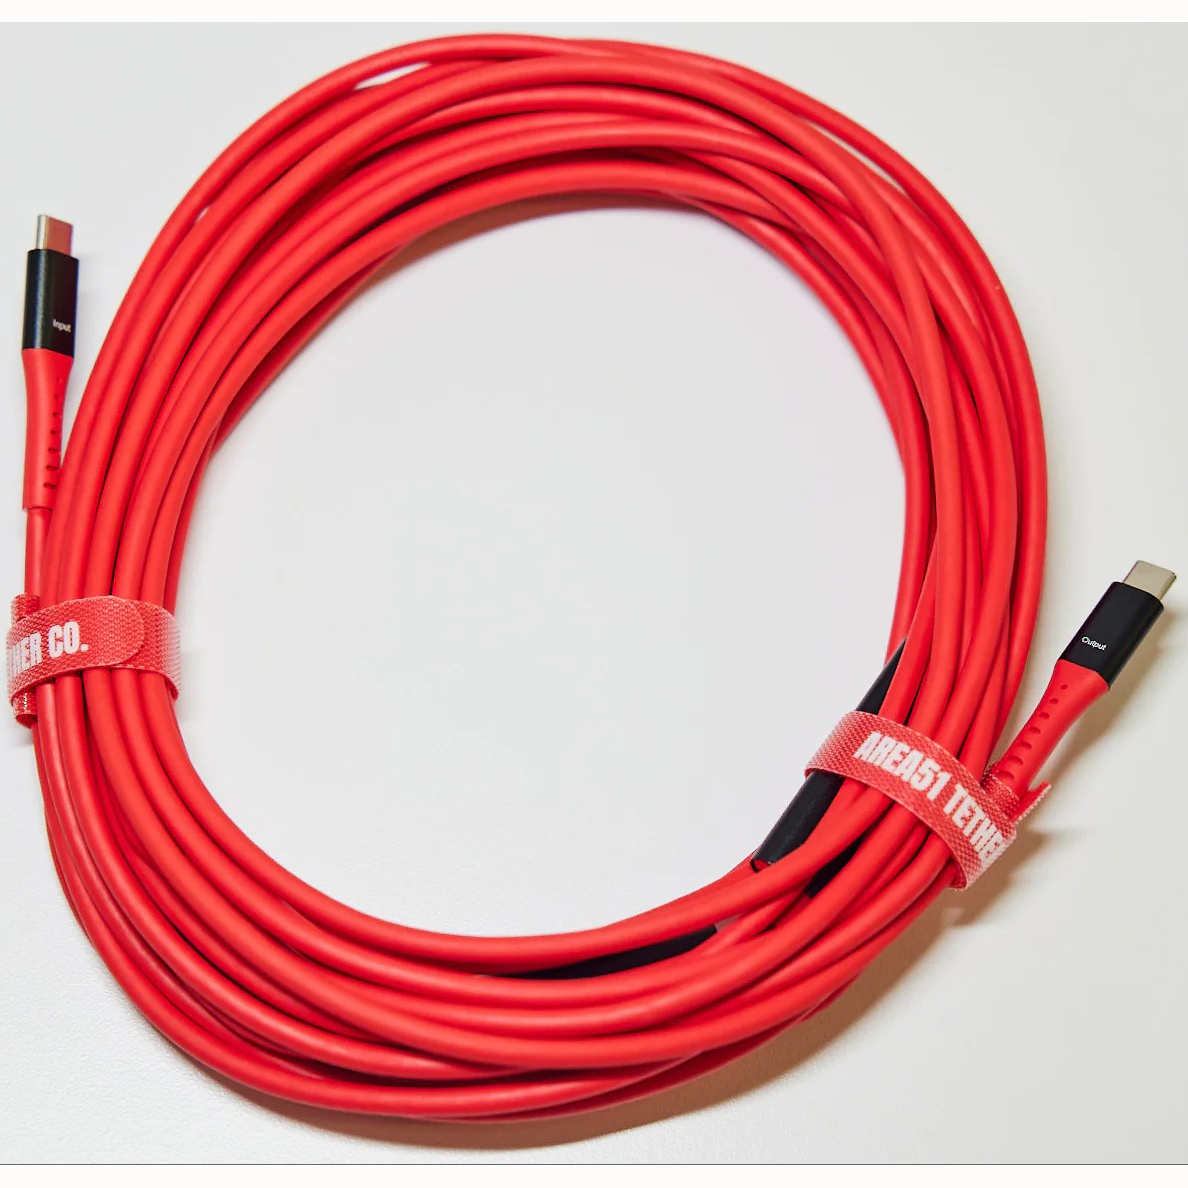 CABLE AREA51 WILTON XL PRO+ USB C TO USB C 9.5 MTS